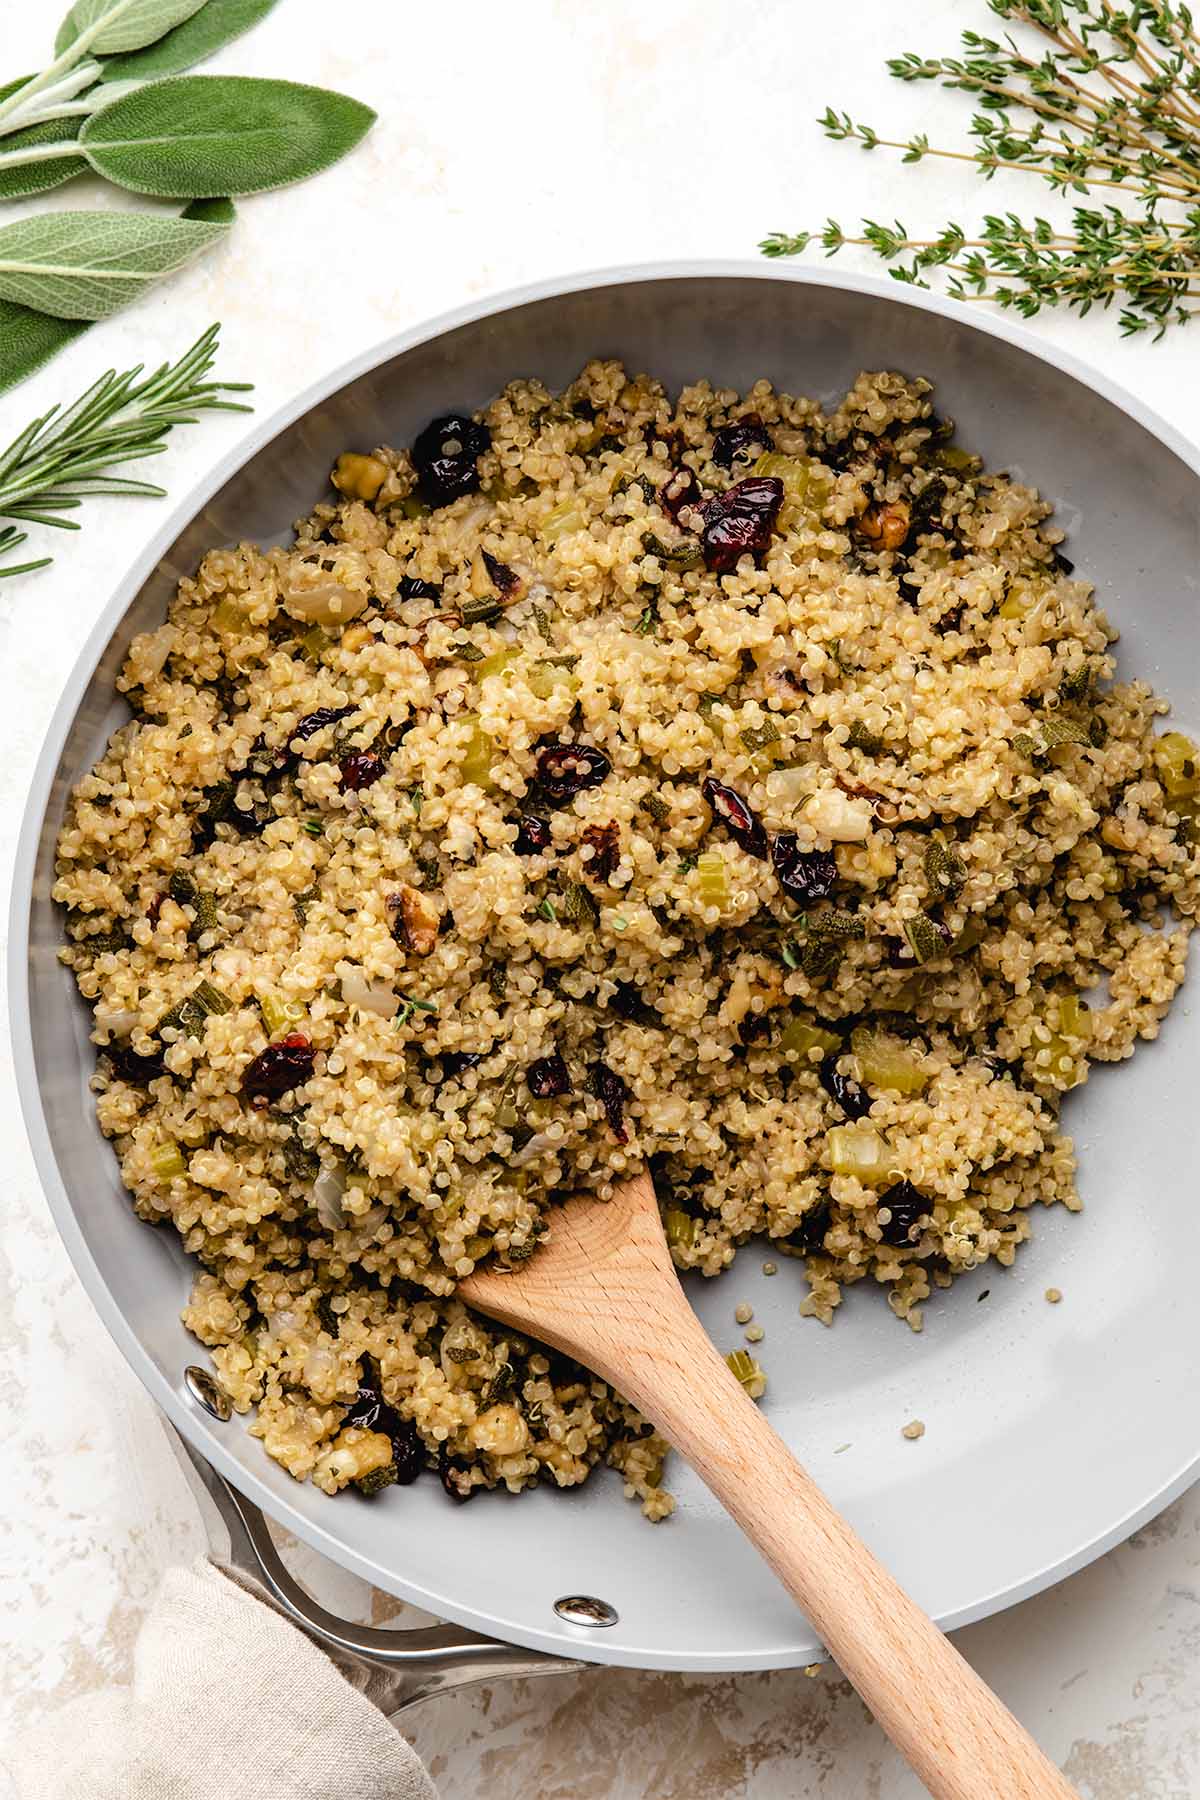 Herbed quinoa stuffing in a light grey skillet, being scooped with a wooden spoon.